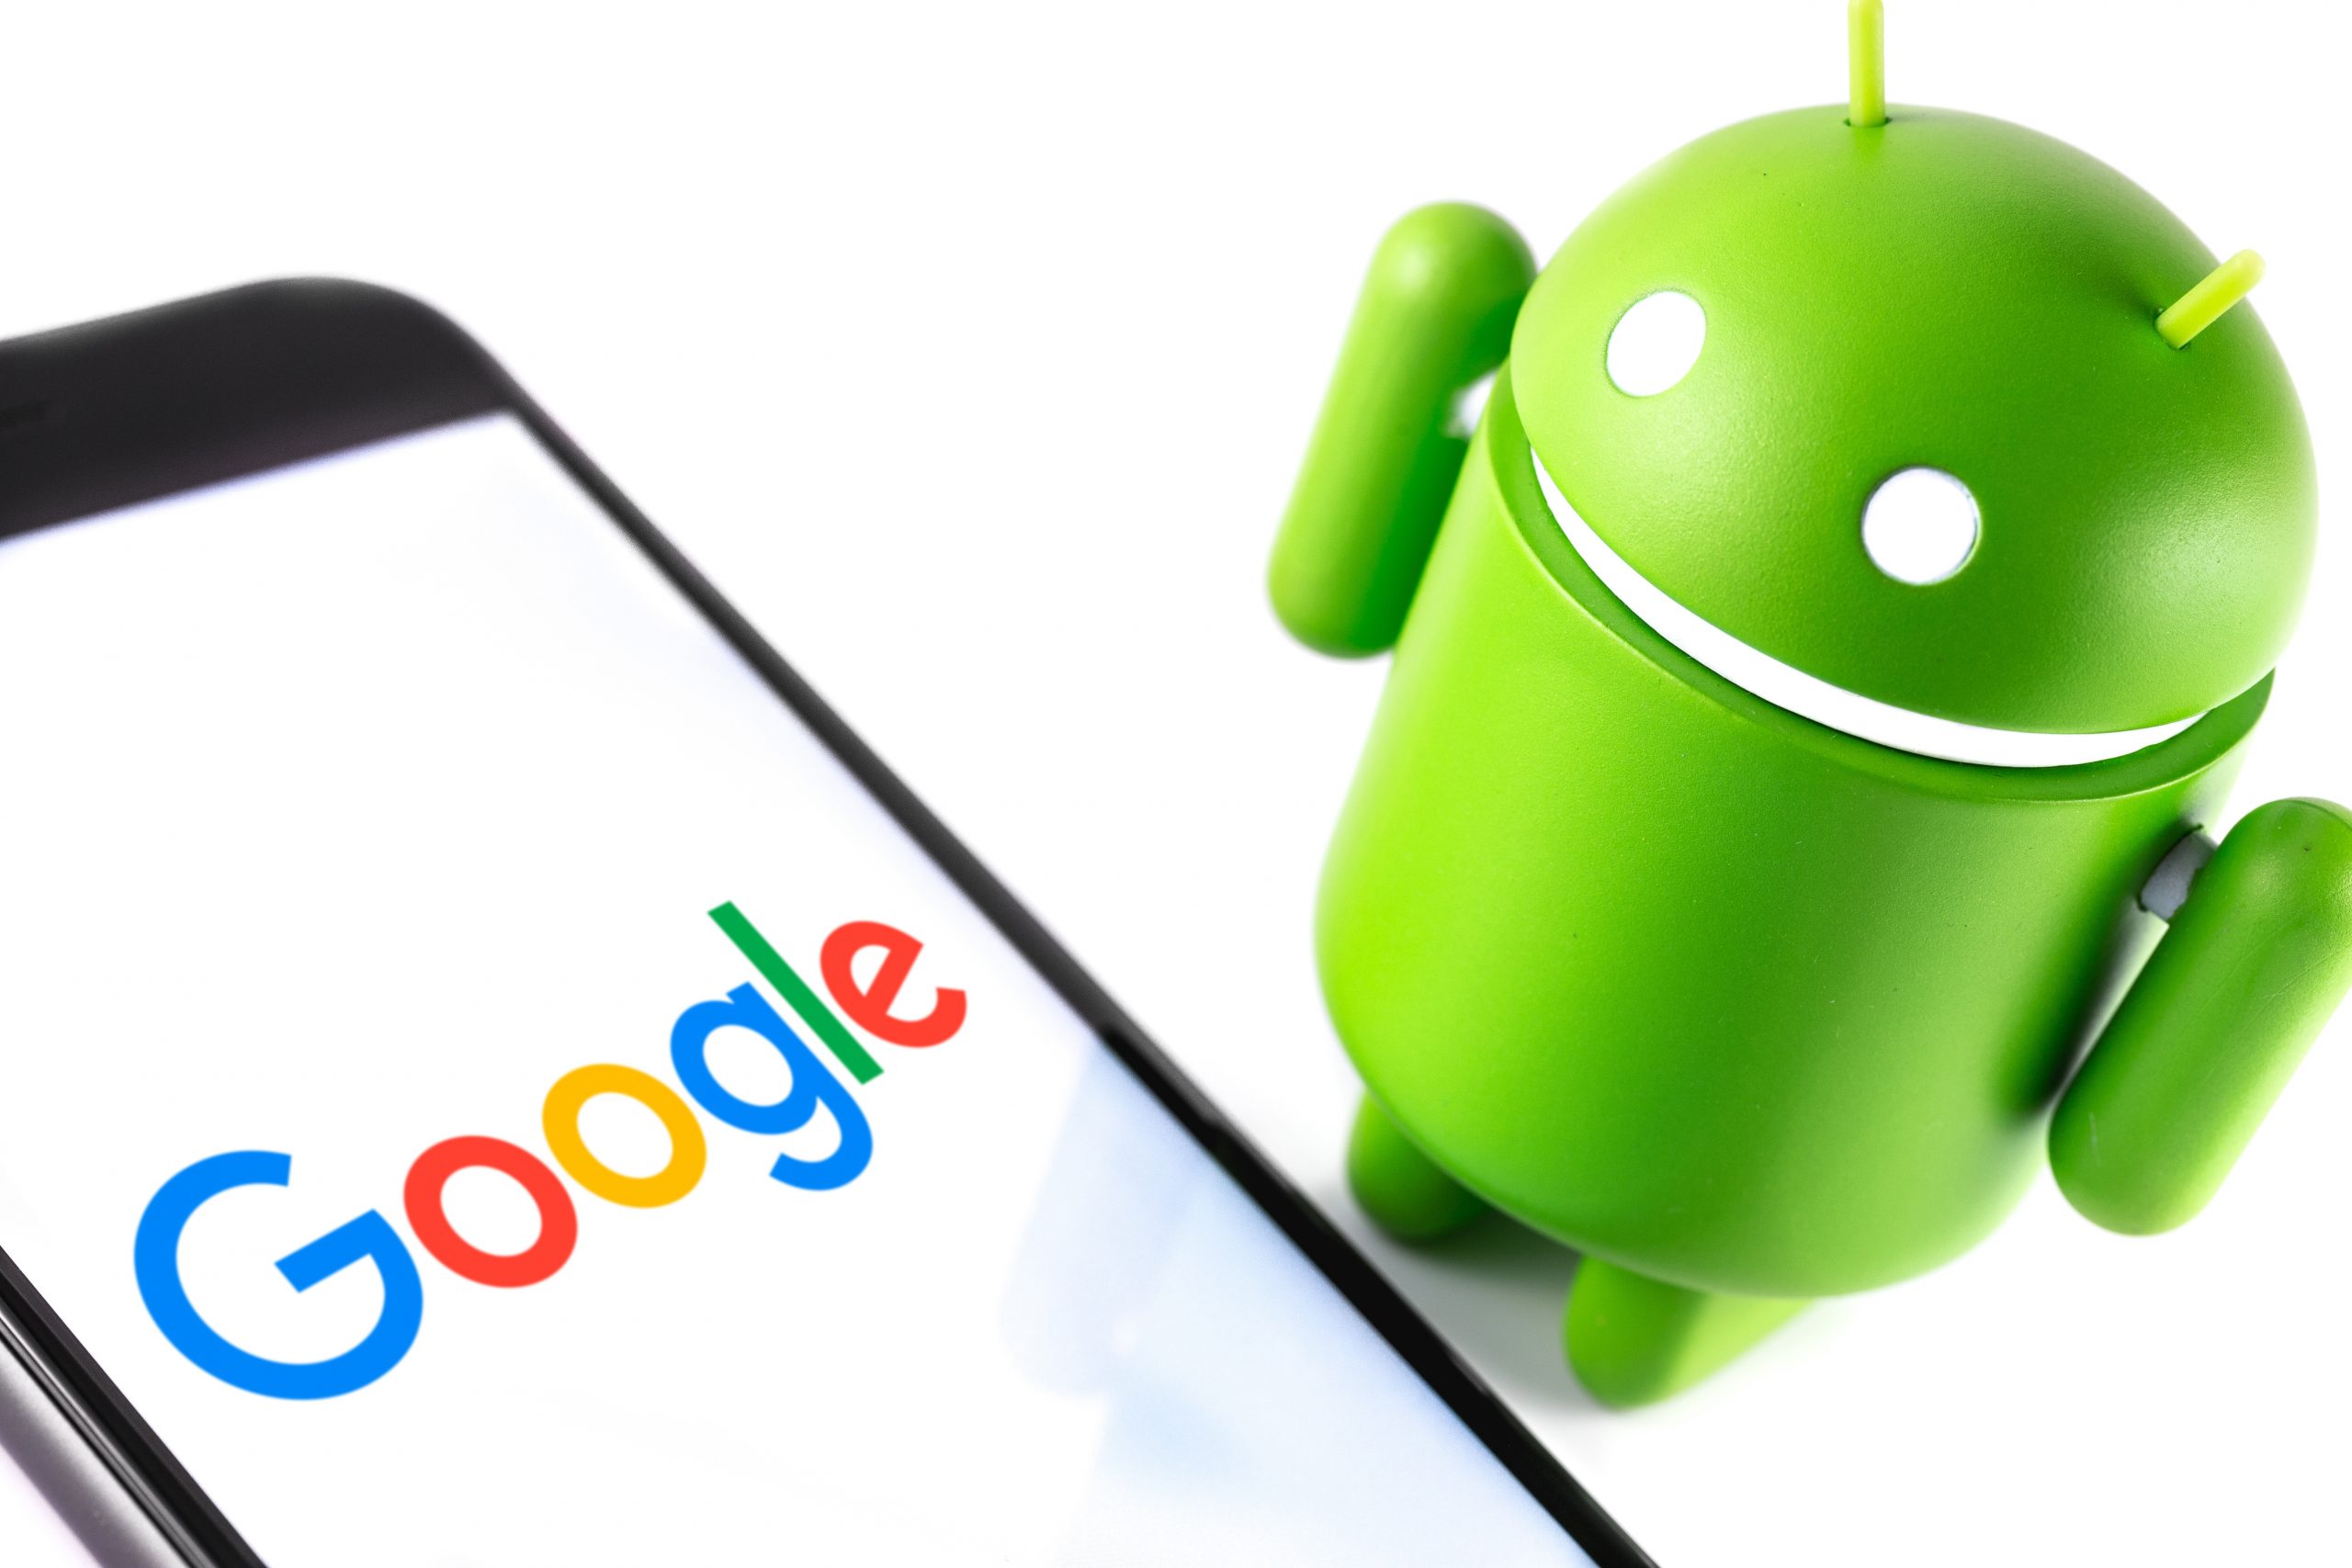 Android Apps That Contain Malware Harmful For Privacy And Security